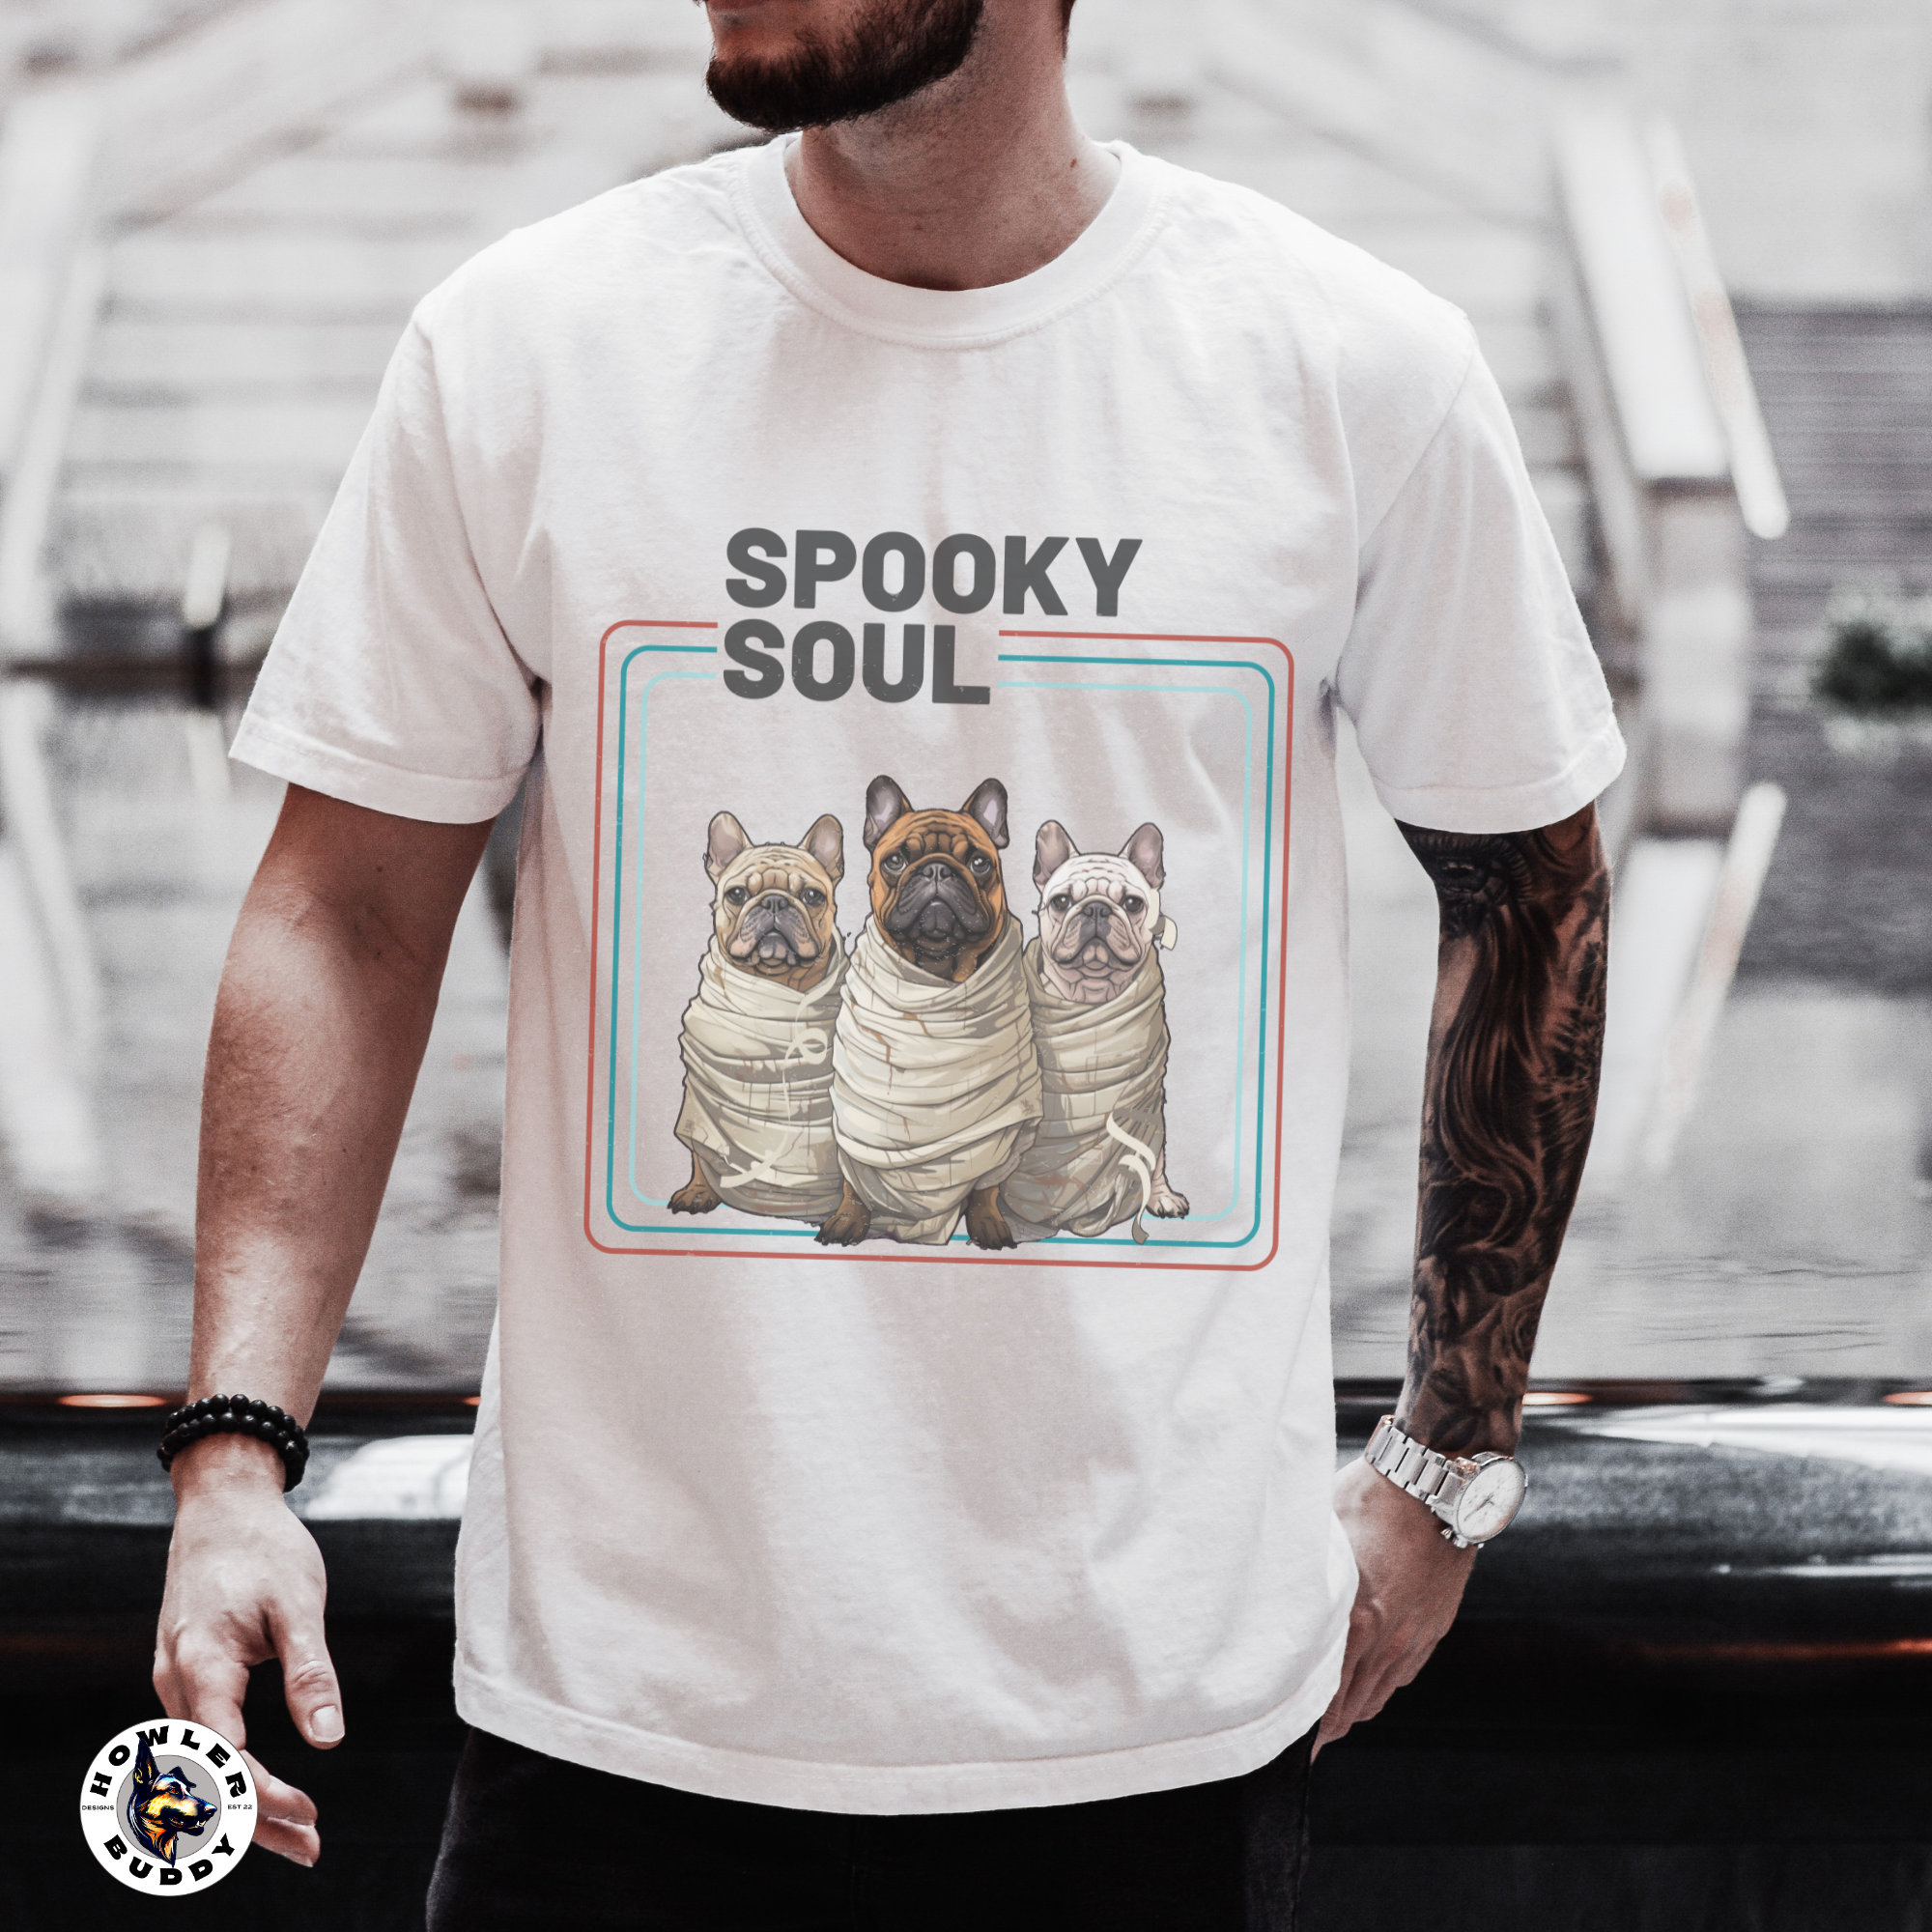 Discover Spooky Soul of a Frenchie : Retro Mummy Halloween Unisex Shirt - The Perfect Gift for French Bulldog Lovers and Fans - Frenchy Mom